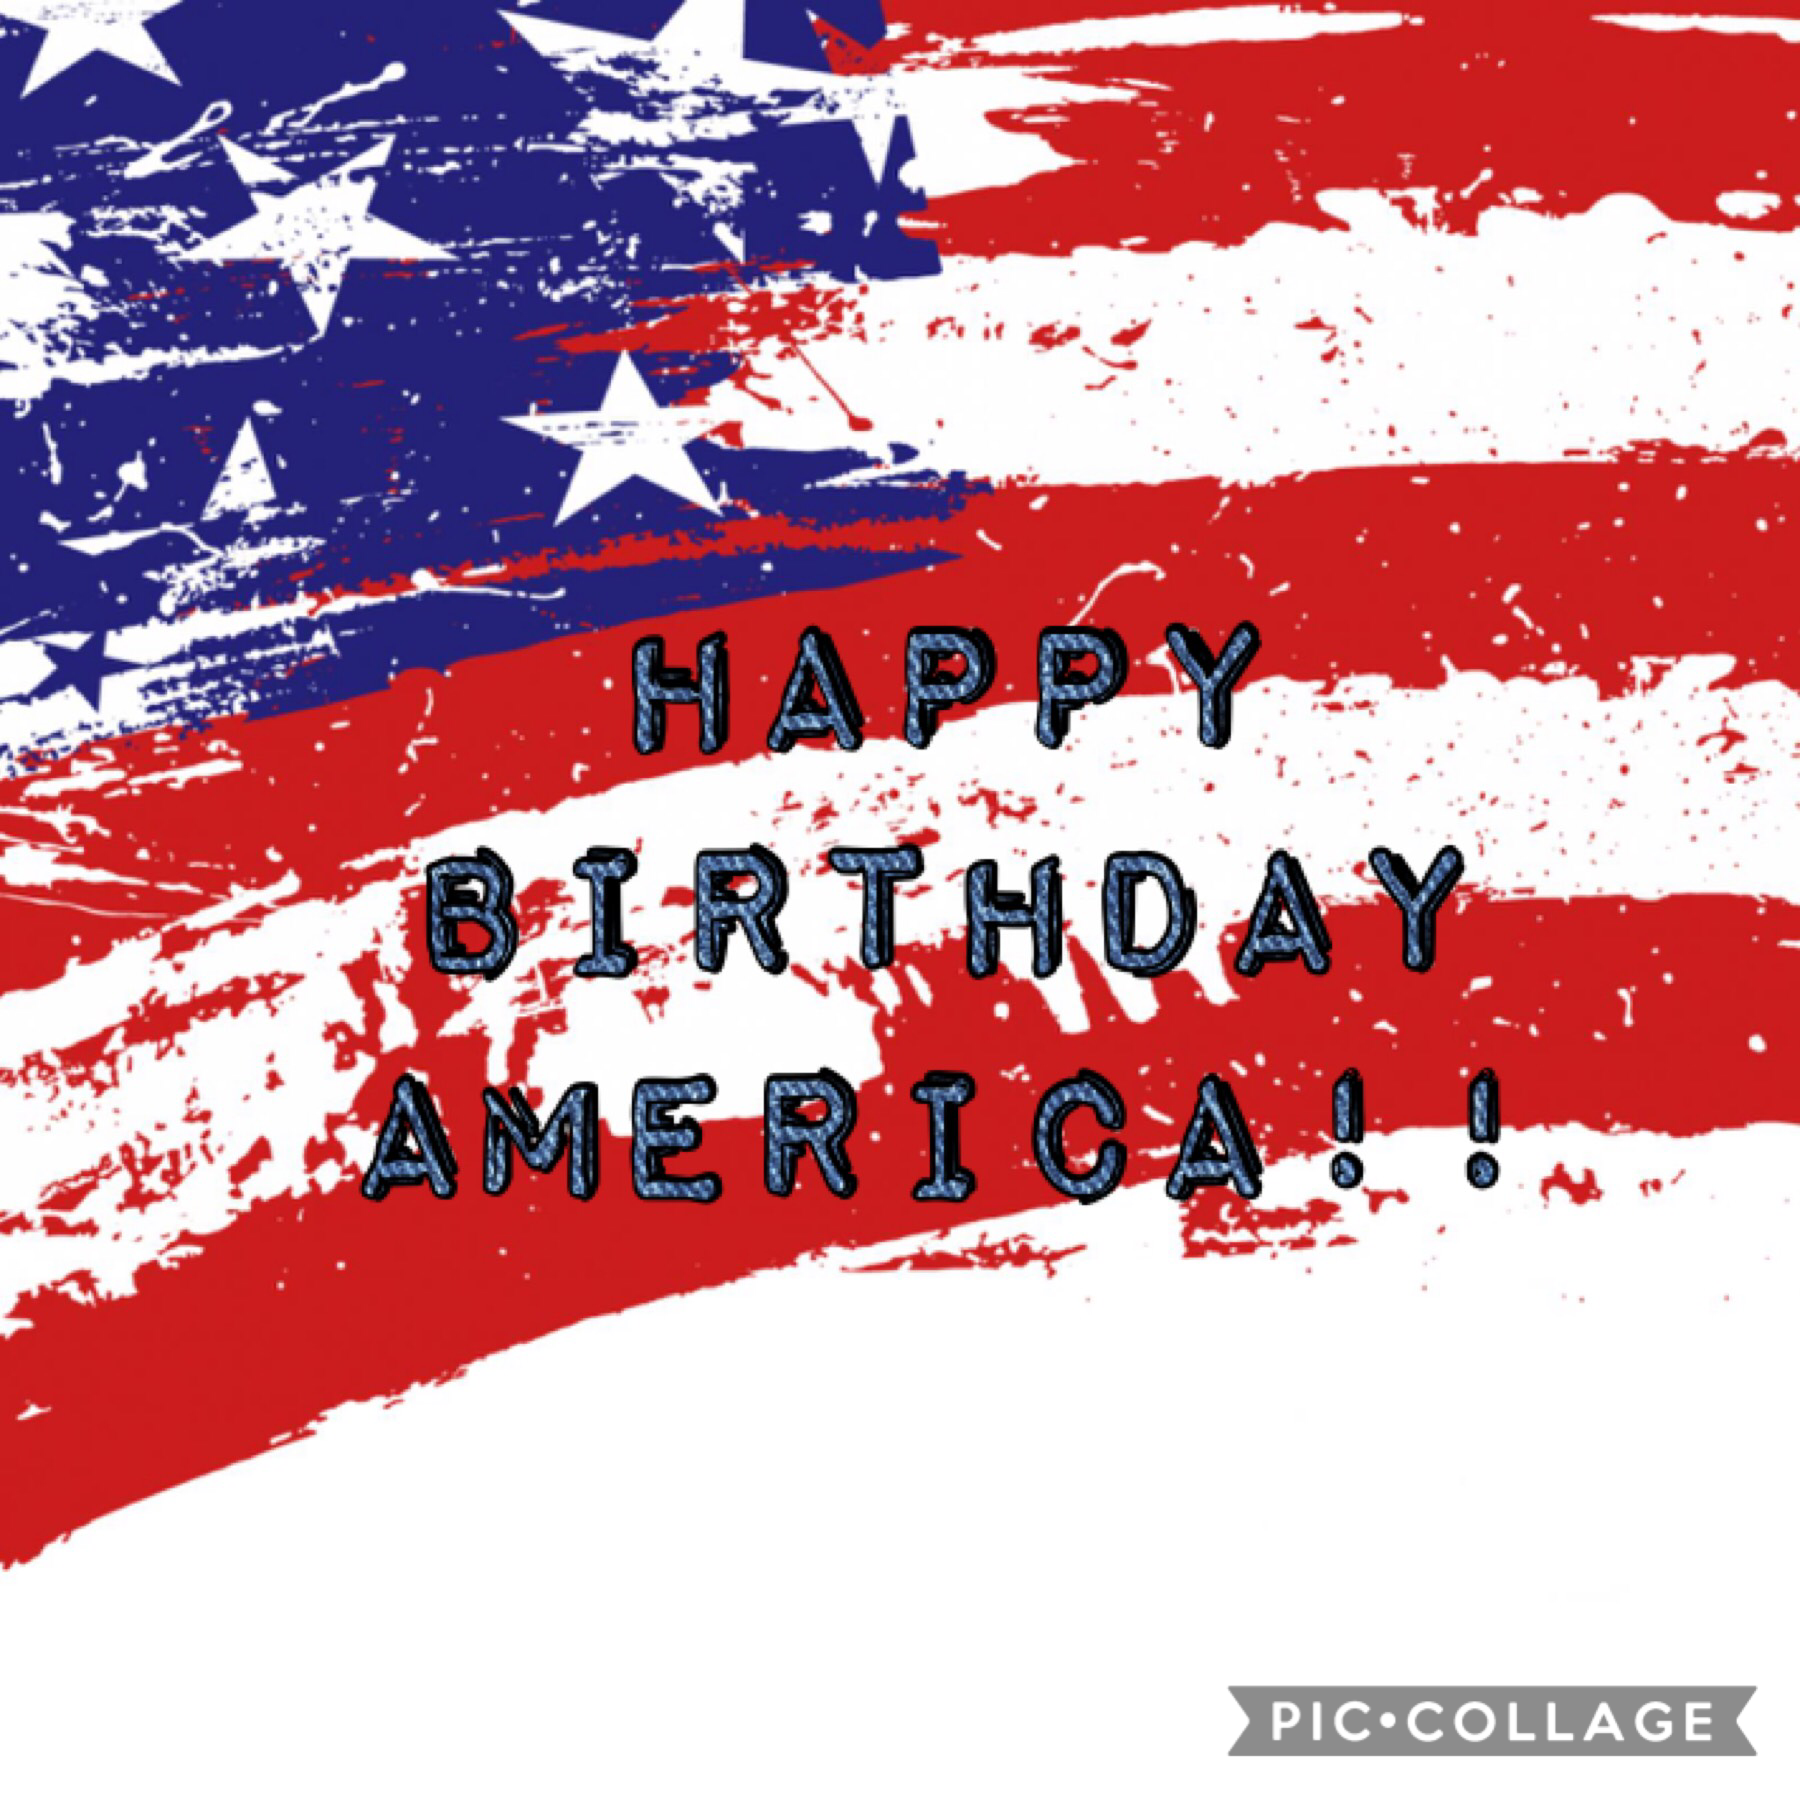 4th of July!!
It's a little late but I'm still going to post it!! Happy birthday America and all that she's gone through to get here today!!